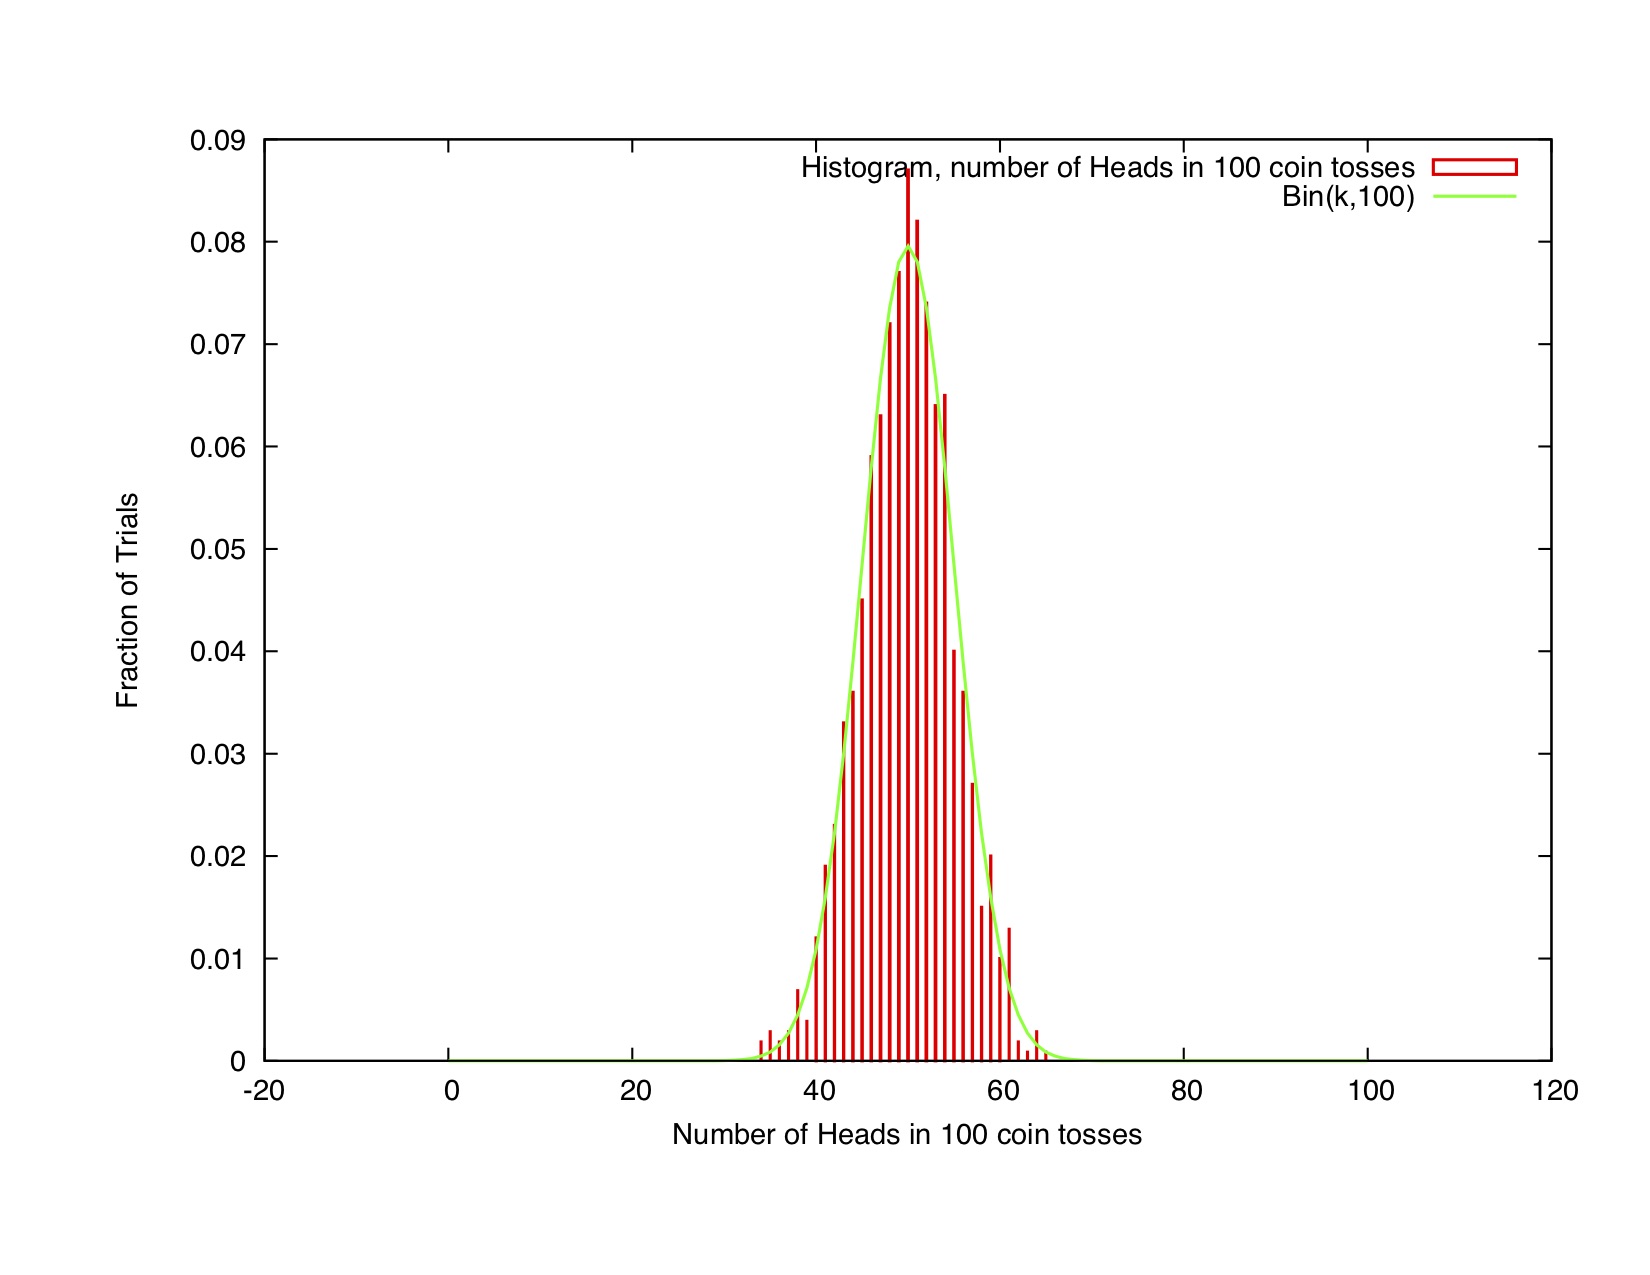 Histogram showing the number of heads in a 100 coin tosses, repeated 1000 times.